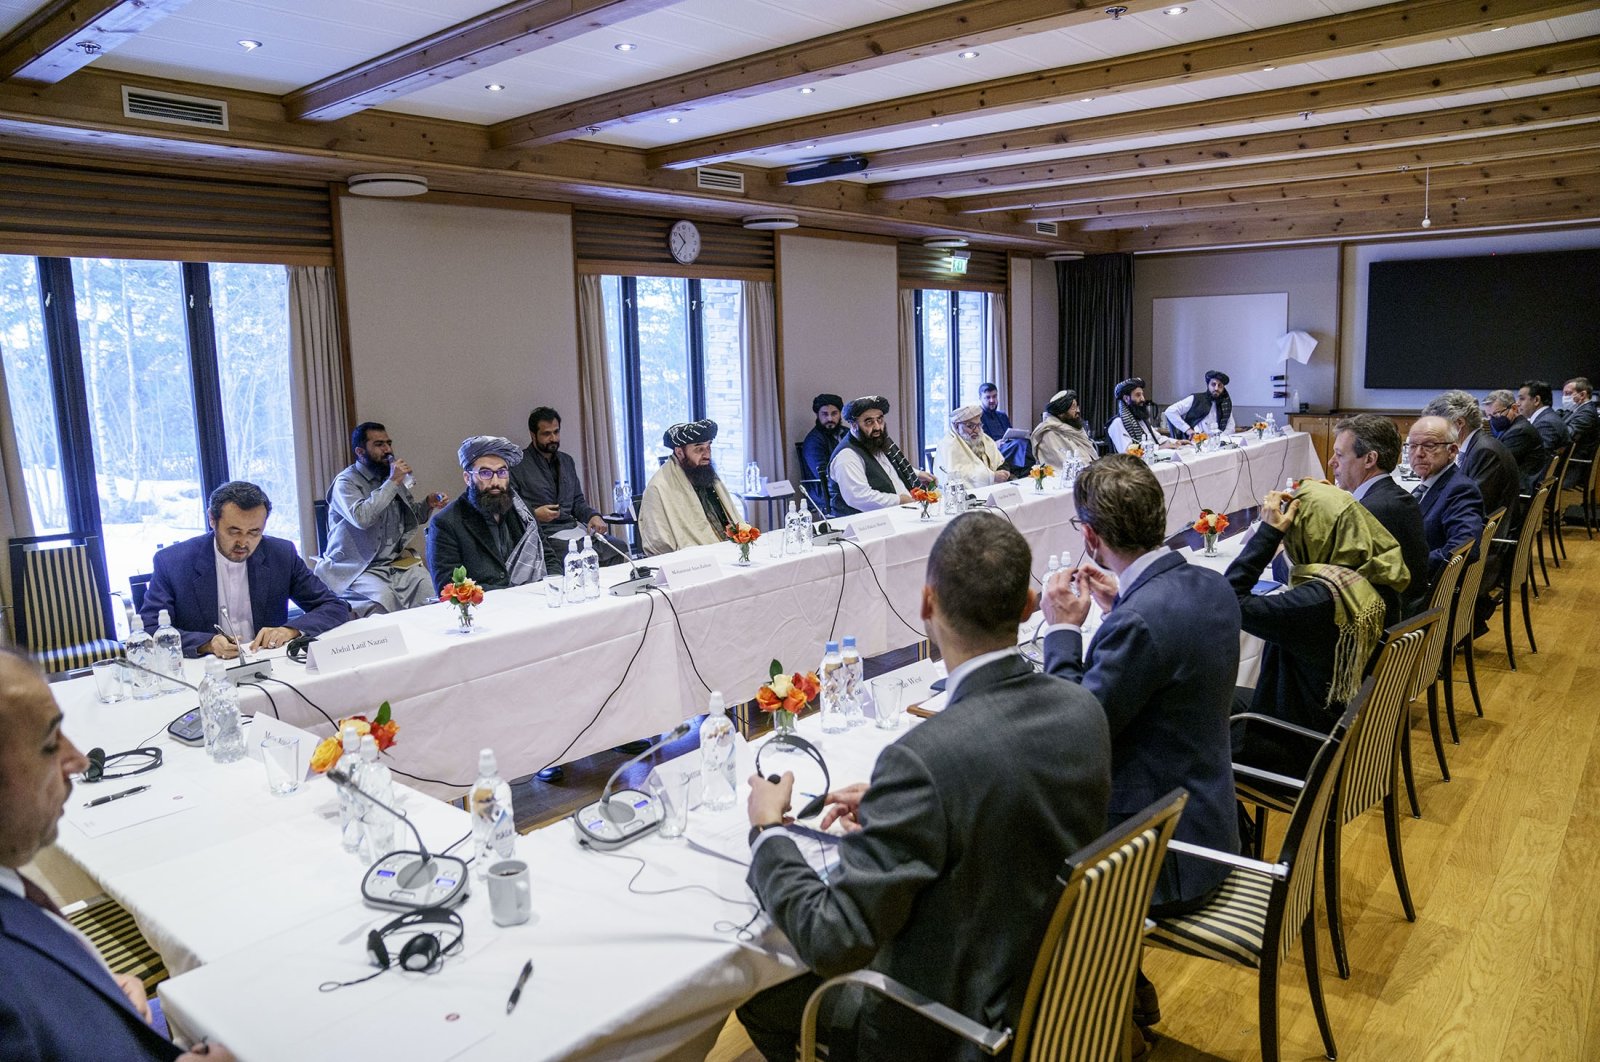 International special representatives and representatives from the Taliban take part in a meeting, in Oslo, Norway, Jan. 24, 2022. (AP Photo)